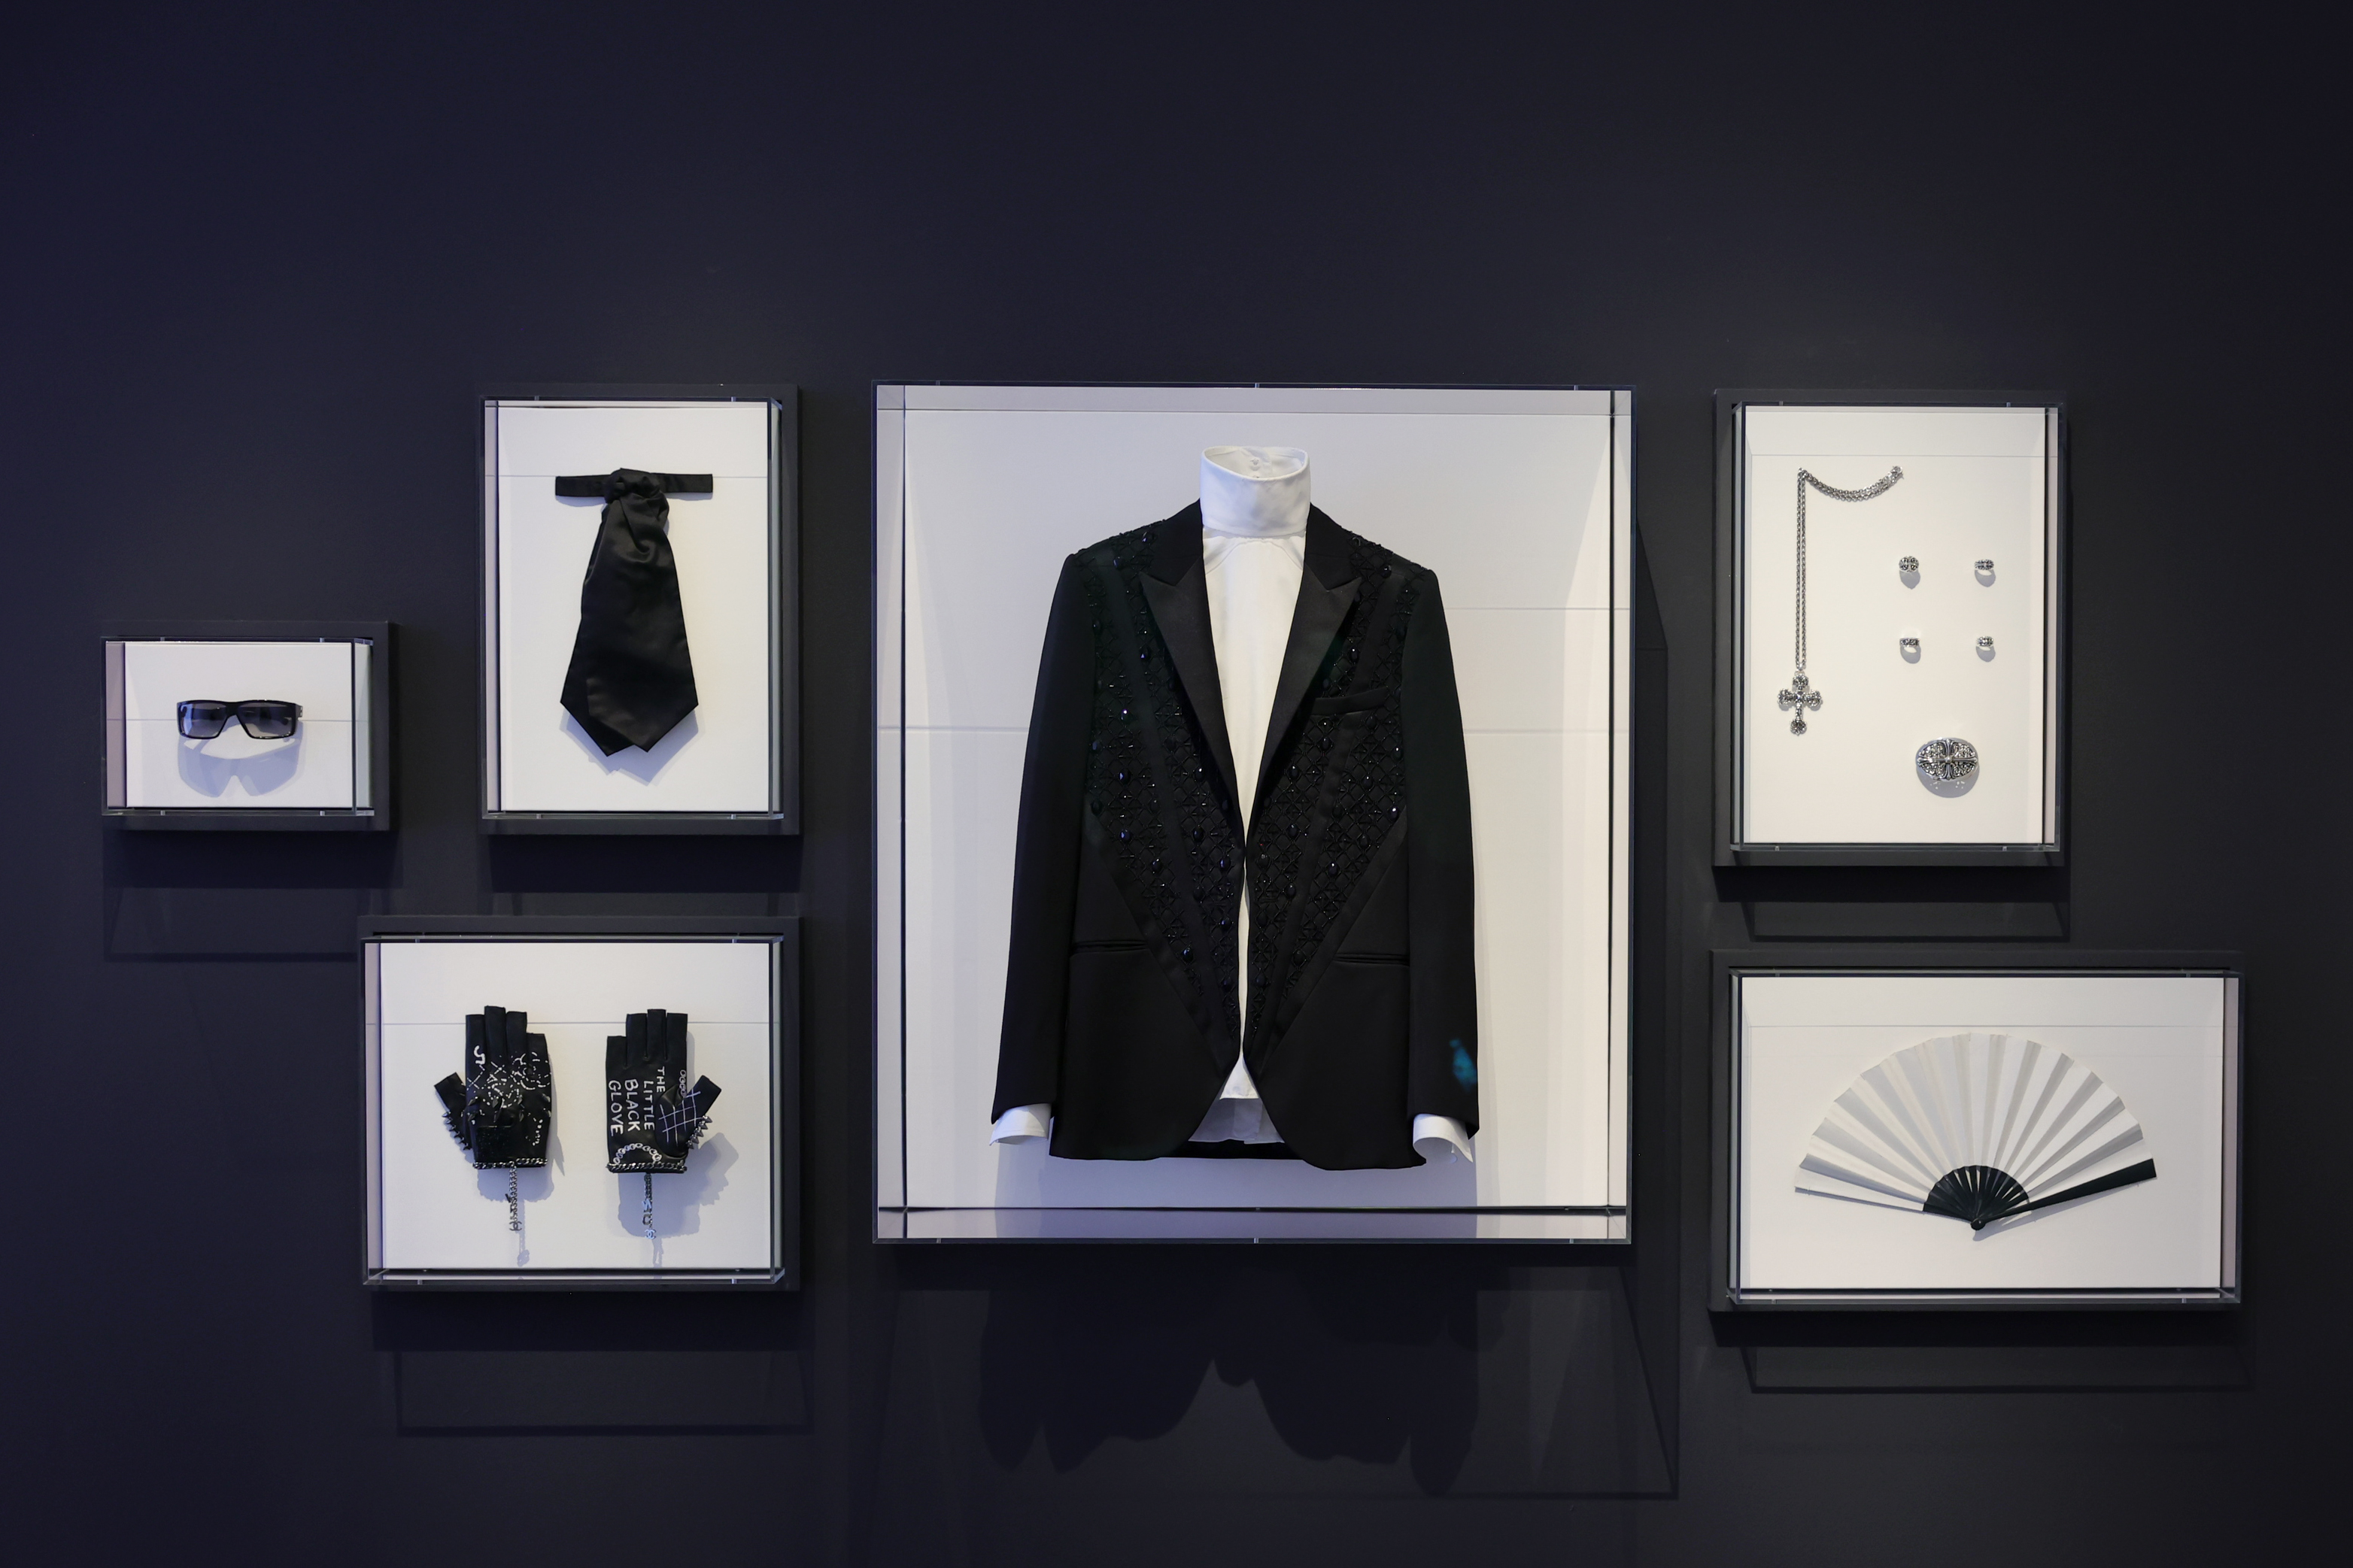 Dark sunglasses, leather gloves, a pleated fan: Key parts of Karl Lagerfeld's personal aesthetic — which the designer curated as carefully as his collections — are displayed during the 2023 press preview of the Costume Institute's exhibition, "Karl Lagerfeld: A Line of Beauty," on May 1, 2023.